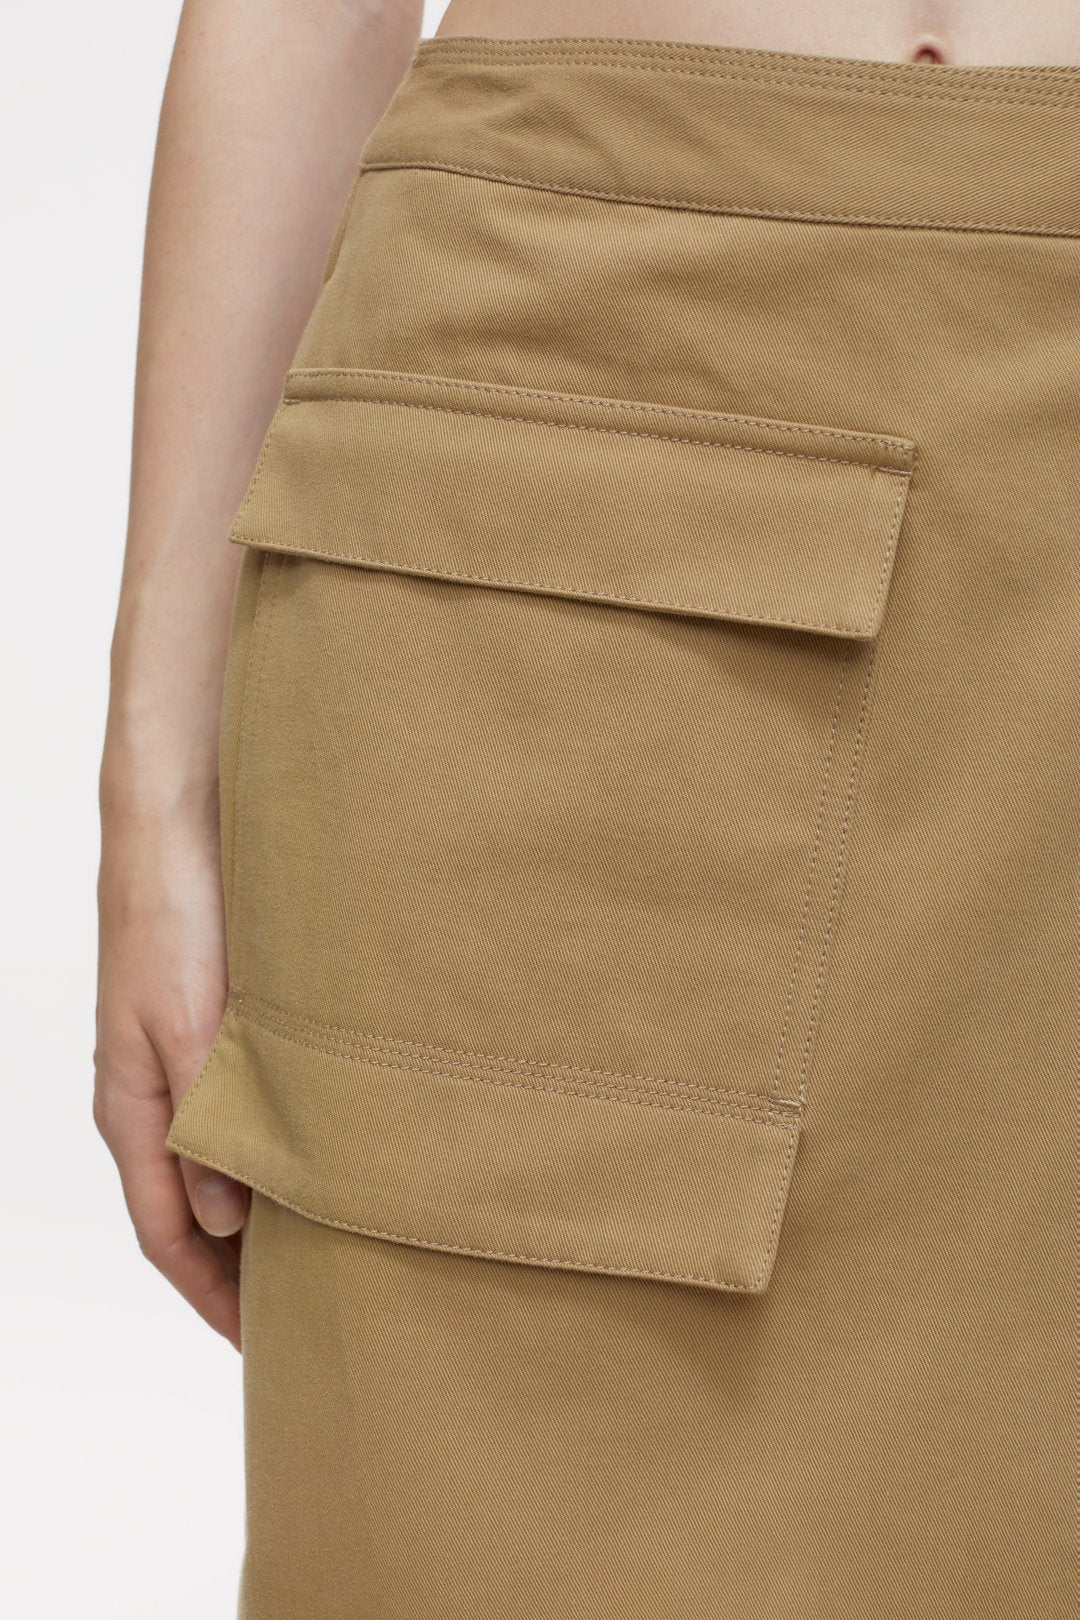 WRAP SKIRT - TAUPE BEIGE